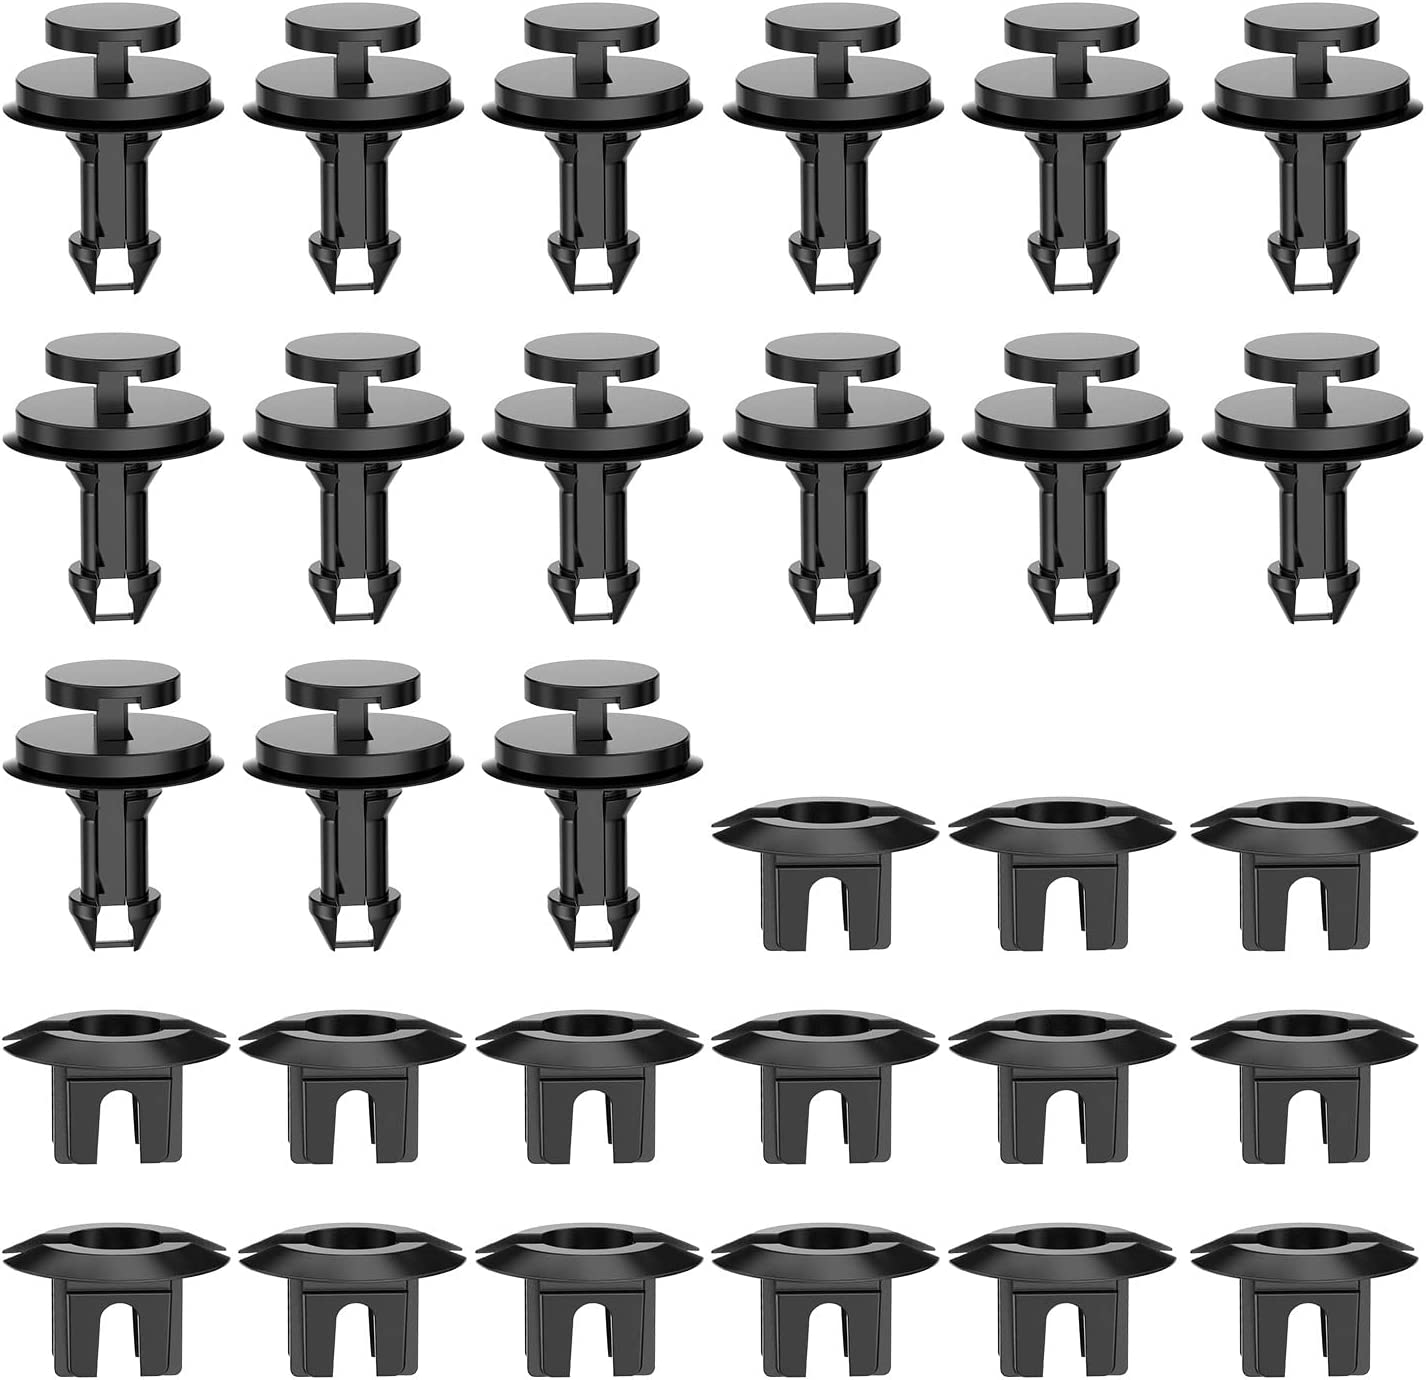 30 Pcs Front Air Deflector Retainers Clips For Cadillac Escalade Chevrolet Avalanche Colorado GMC C3500 OEM: #GM 15733971,15733970